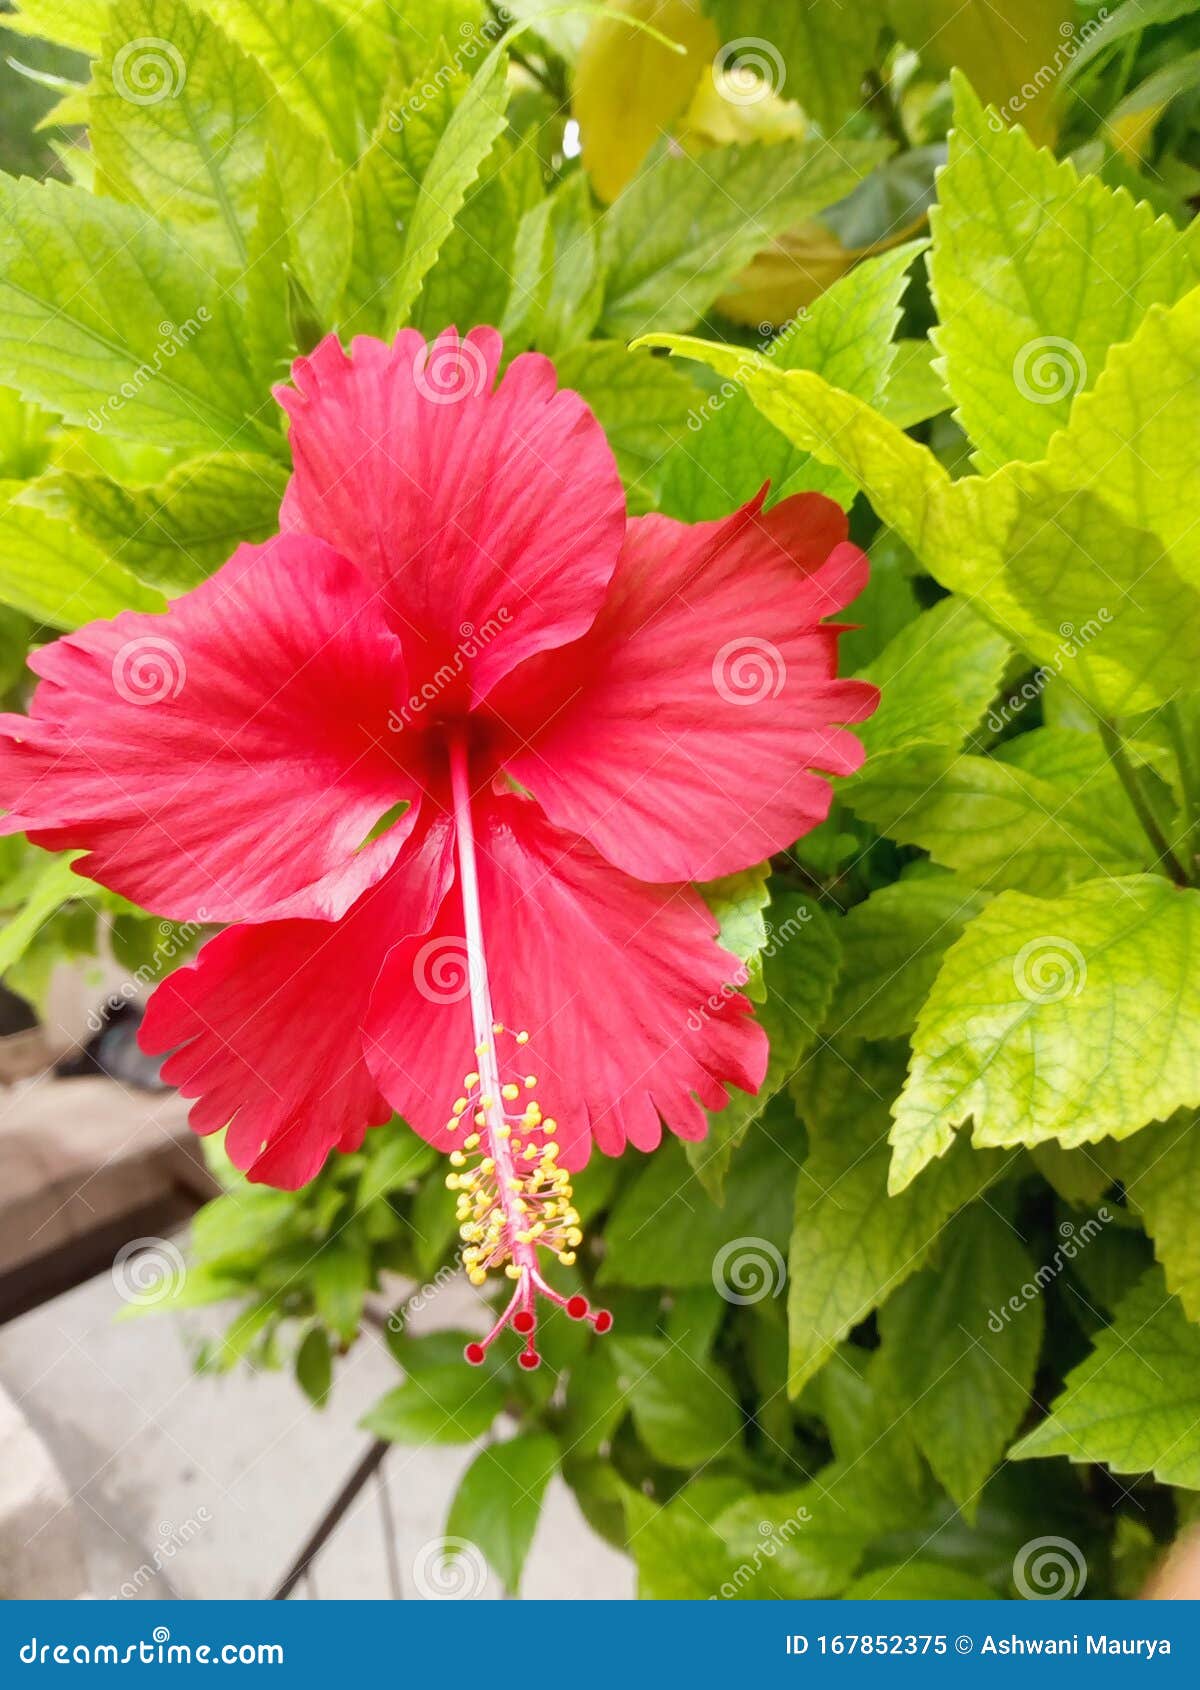 Red Flower with Leaves of Hibiscus Wallpaper Stock Image - Image of  closeup, wallpapern: 167852375